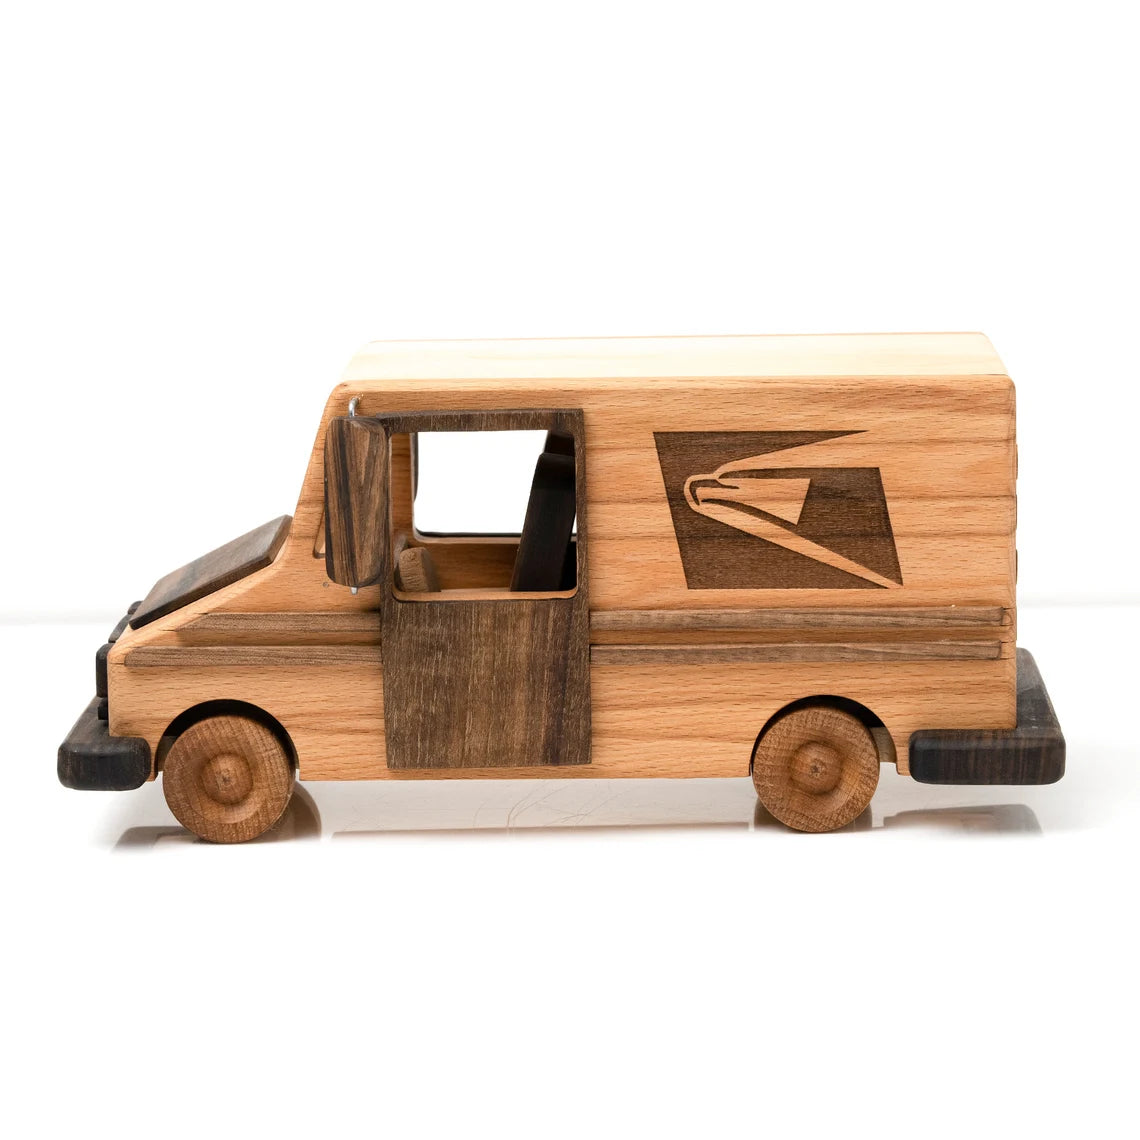 USPS Mail Truck Toy, Personalized United States Postal Service Truck Toy, HANDMADE